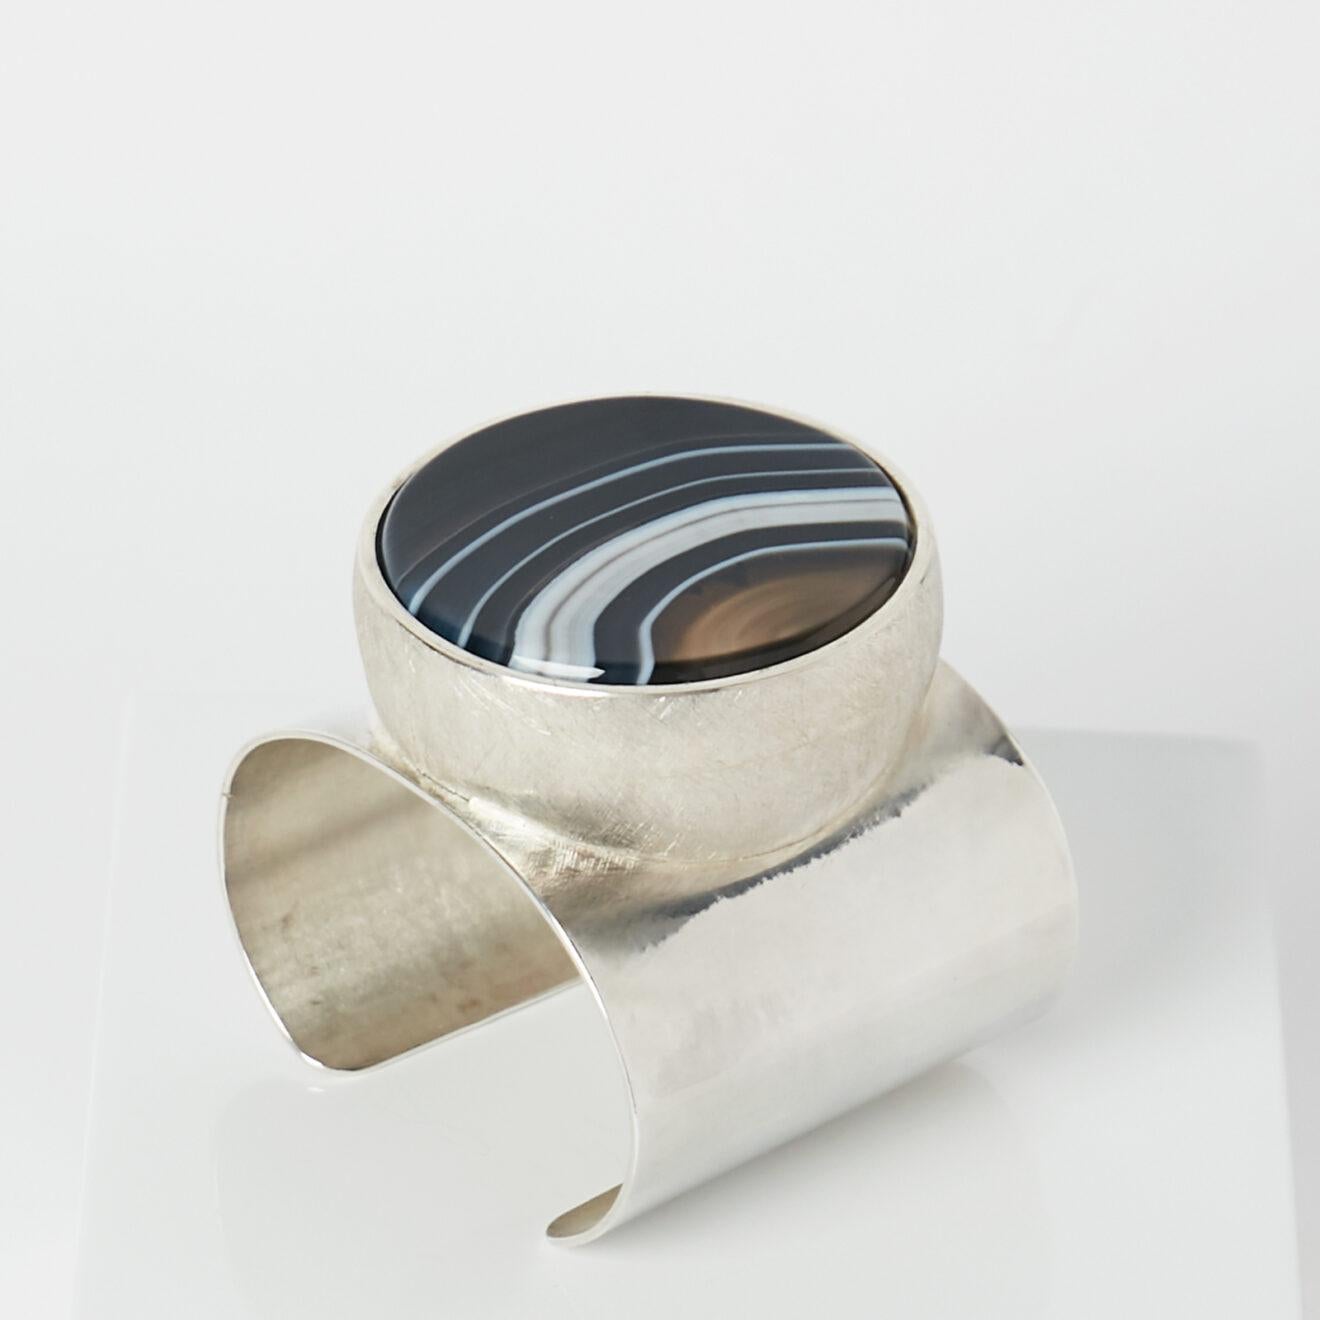 Taher Chemirik’s Edith Cuff is crafted from silver and features a wonderful agate. The one-of-a-kind piece was created exclusively for Objet d’Emotion.

Taher Chemirik’s creations have the beauty of a functional sculpture: dense as well as sensual,